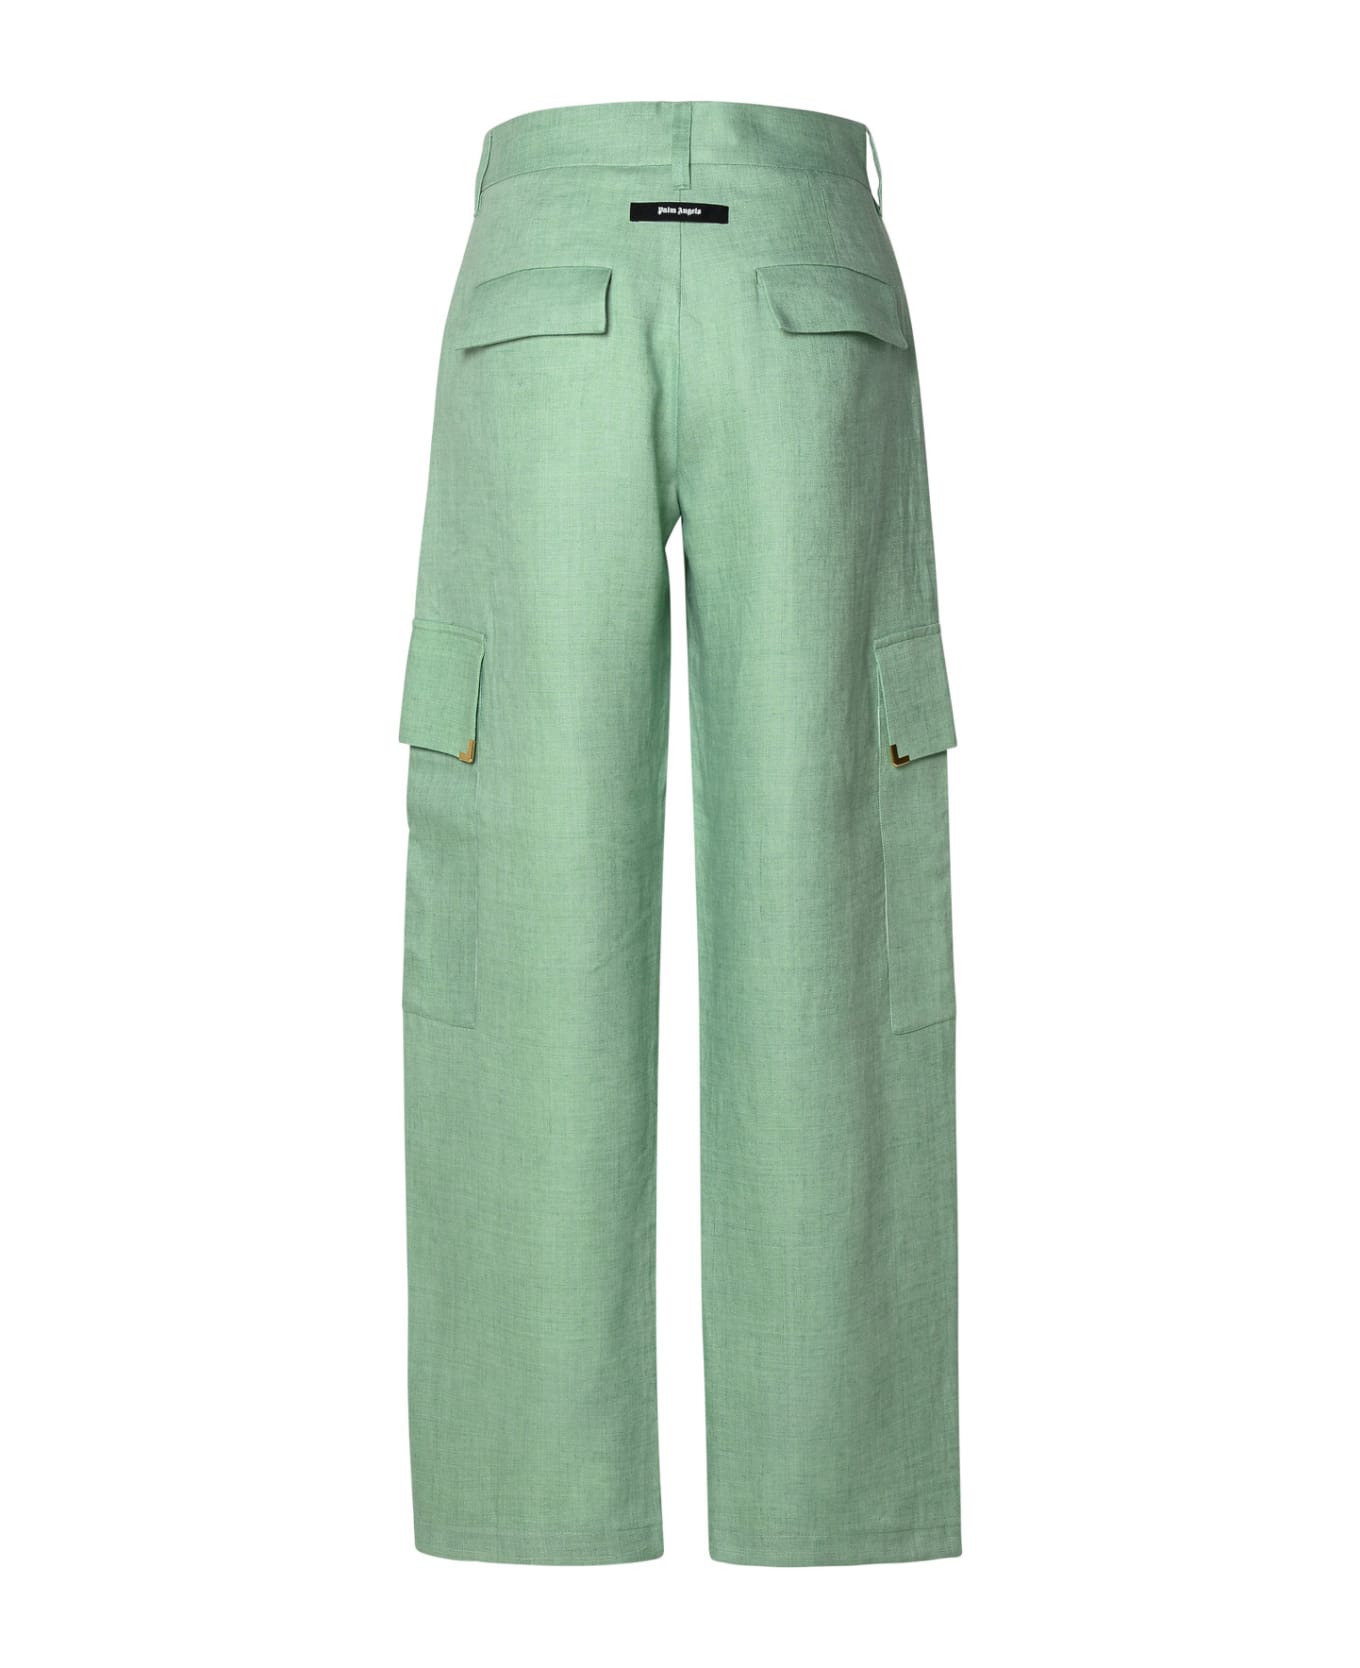 Palm Angels Cargo Pants - Green ボトムス